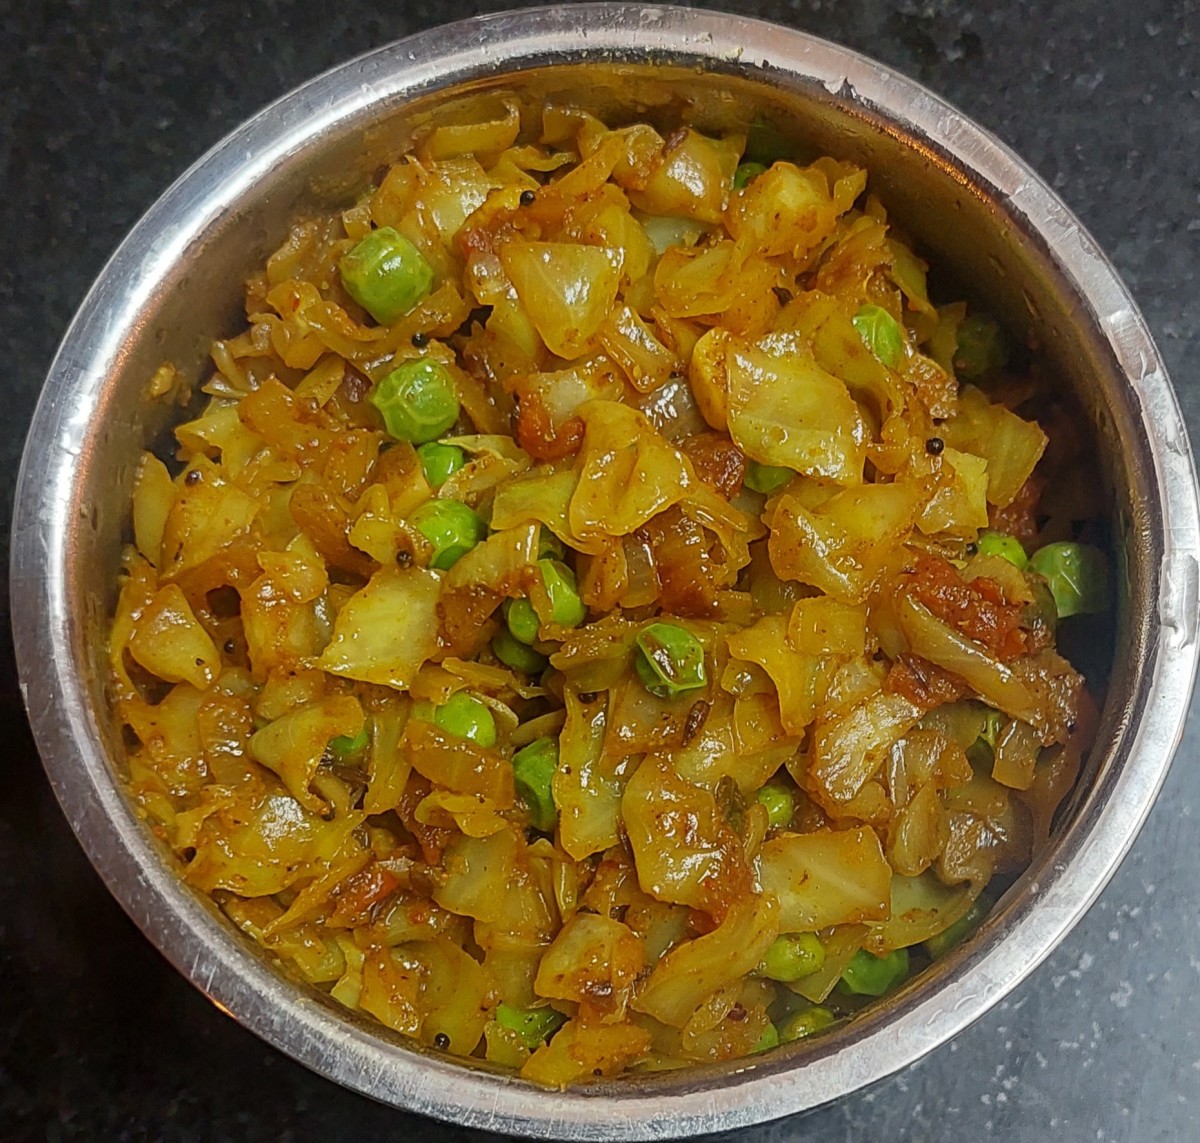 Cabbage and peas stir-fry